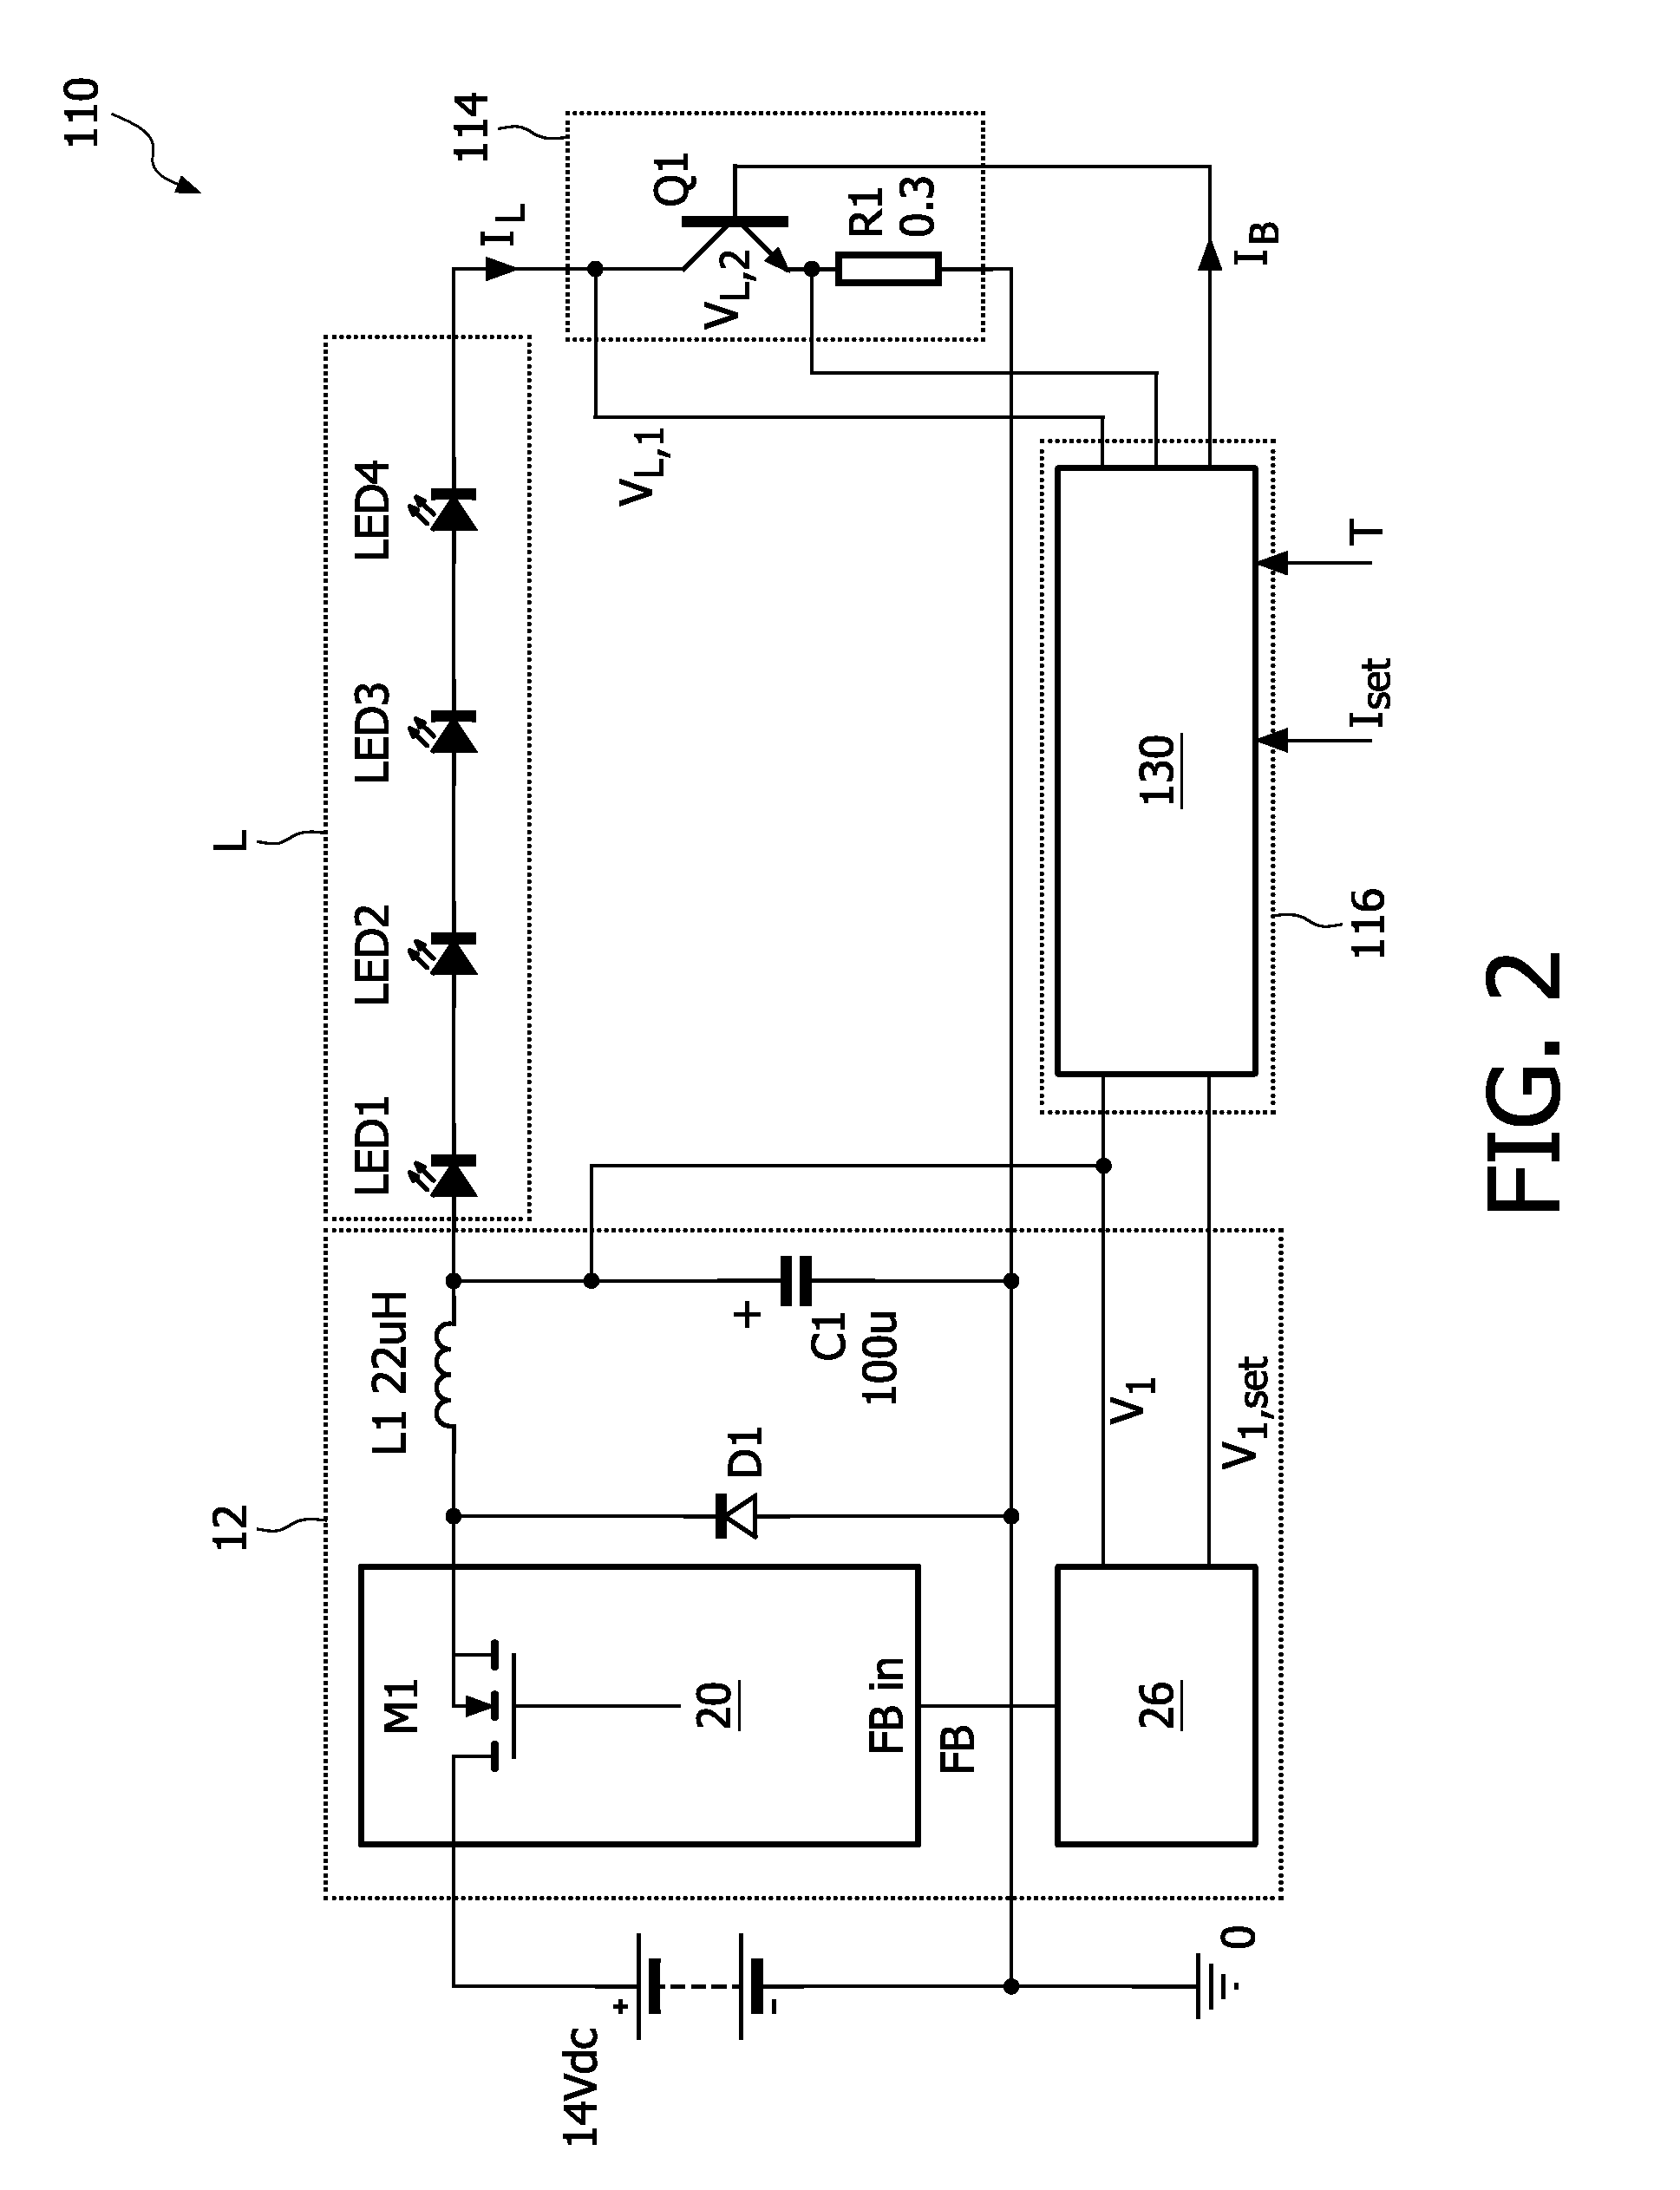 Driver circuit for loads such as led, OLED or laser diodes